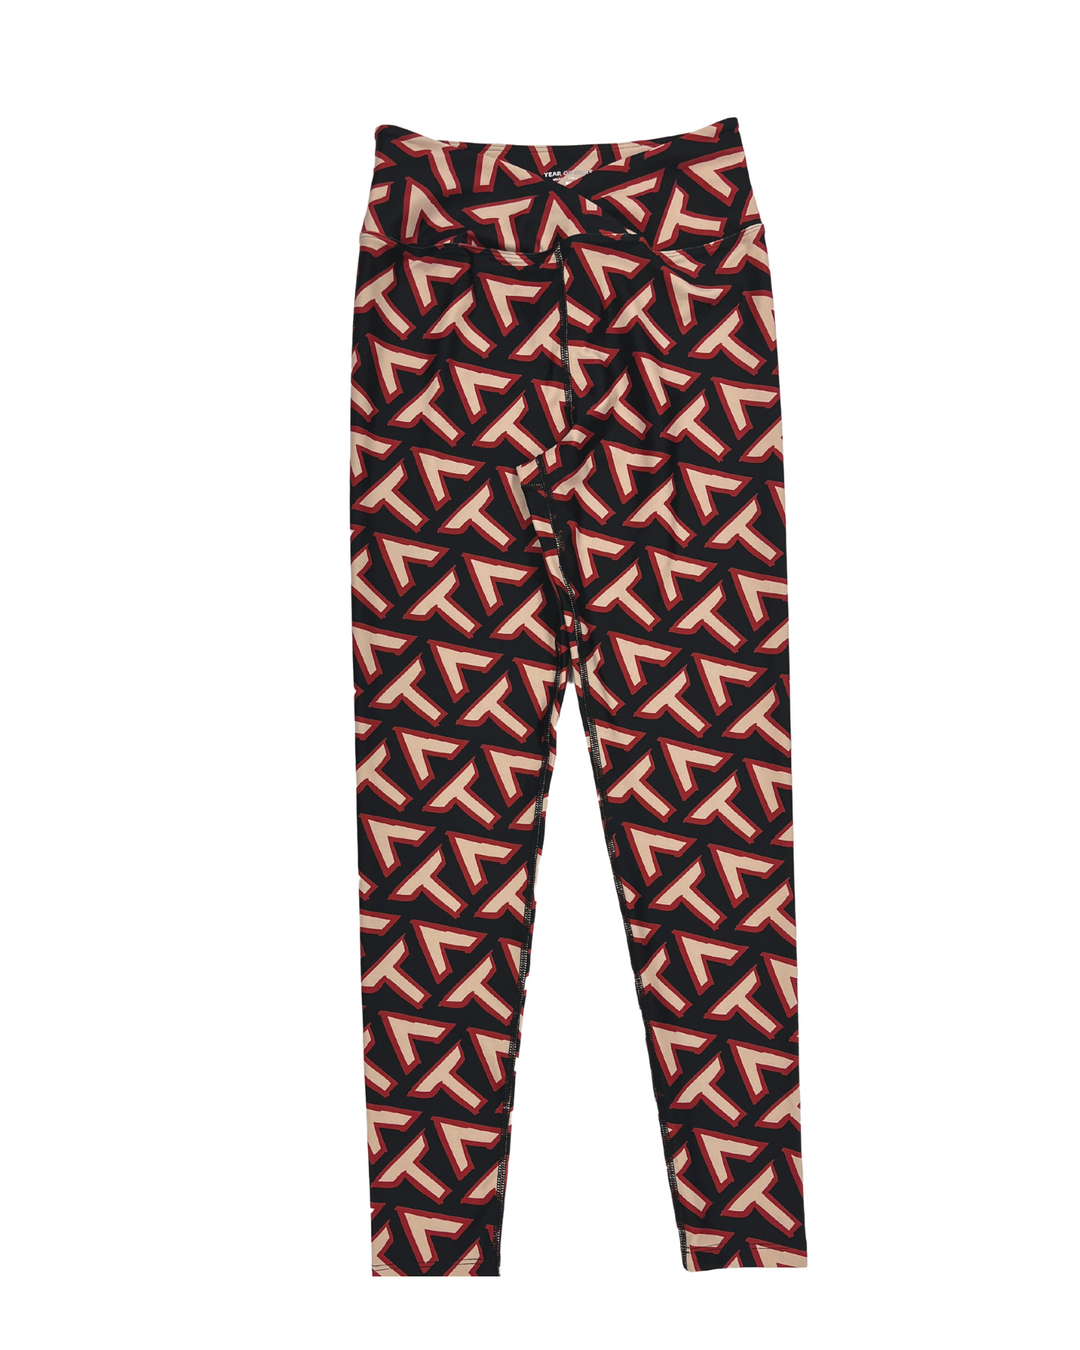 Black and Red Leggings - Extra Small And Small